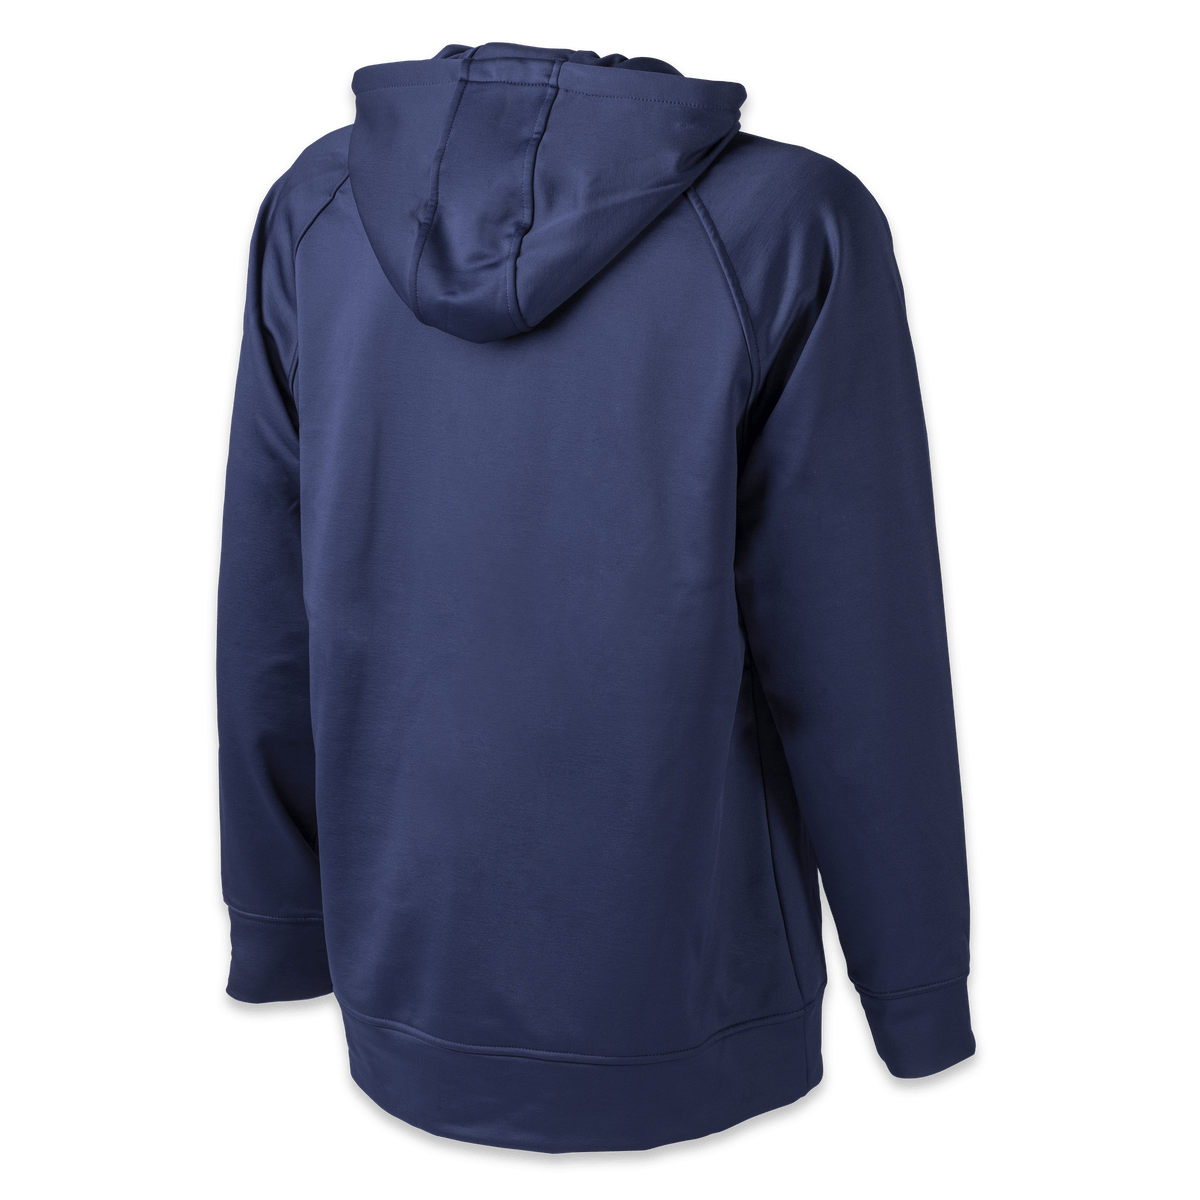 Pull-over Hoodie